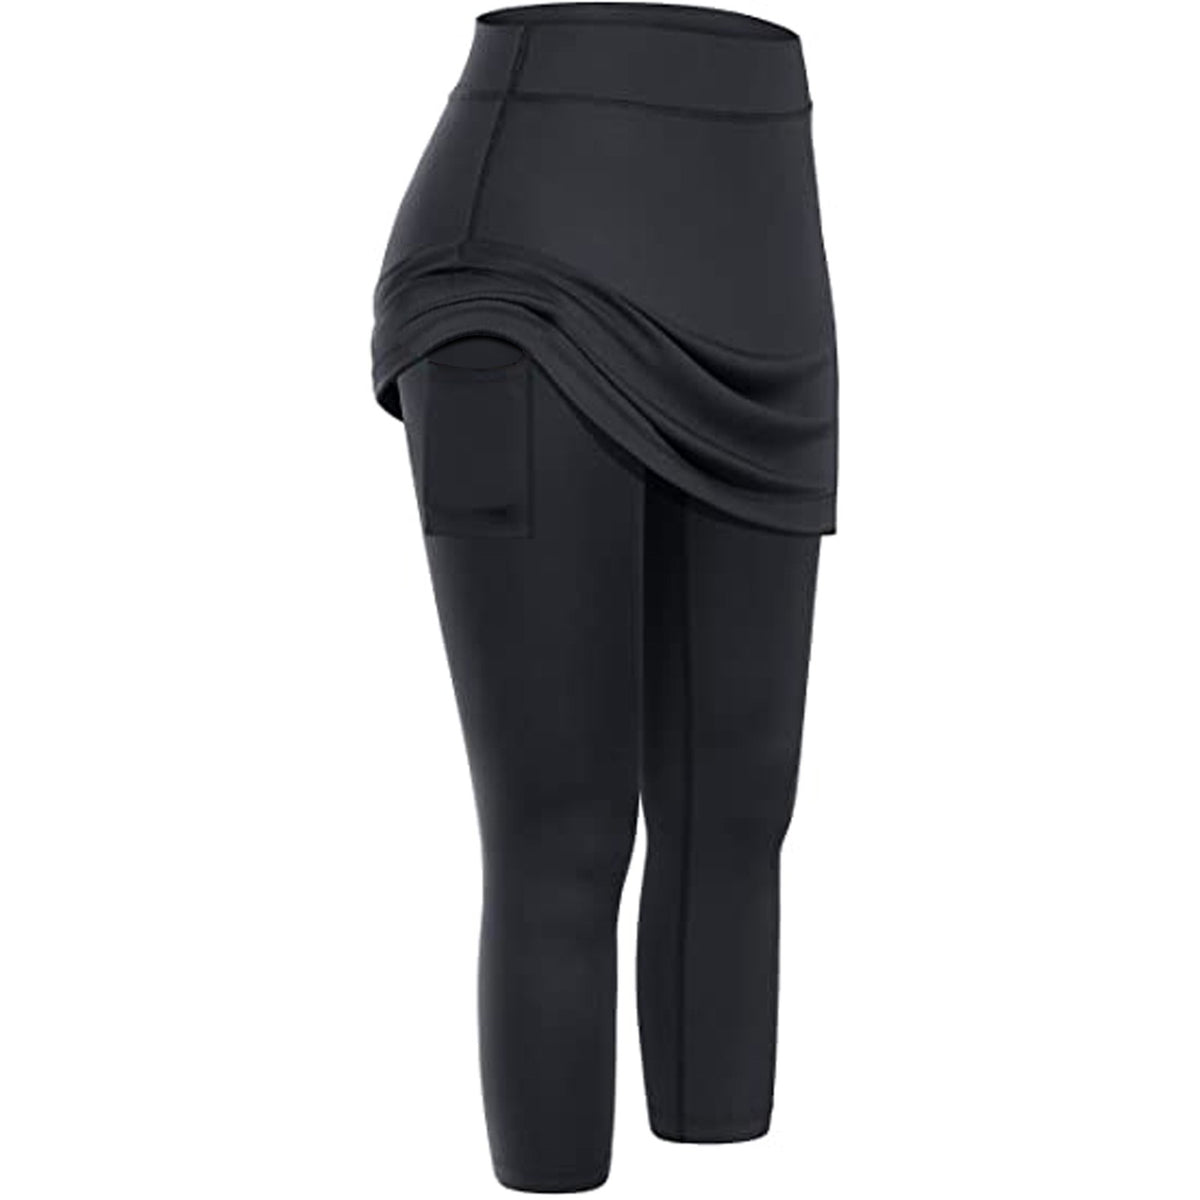 Women's Skirt Leggings With Pocket - Collections By Jay